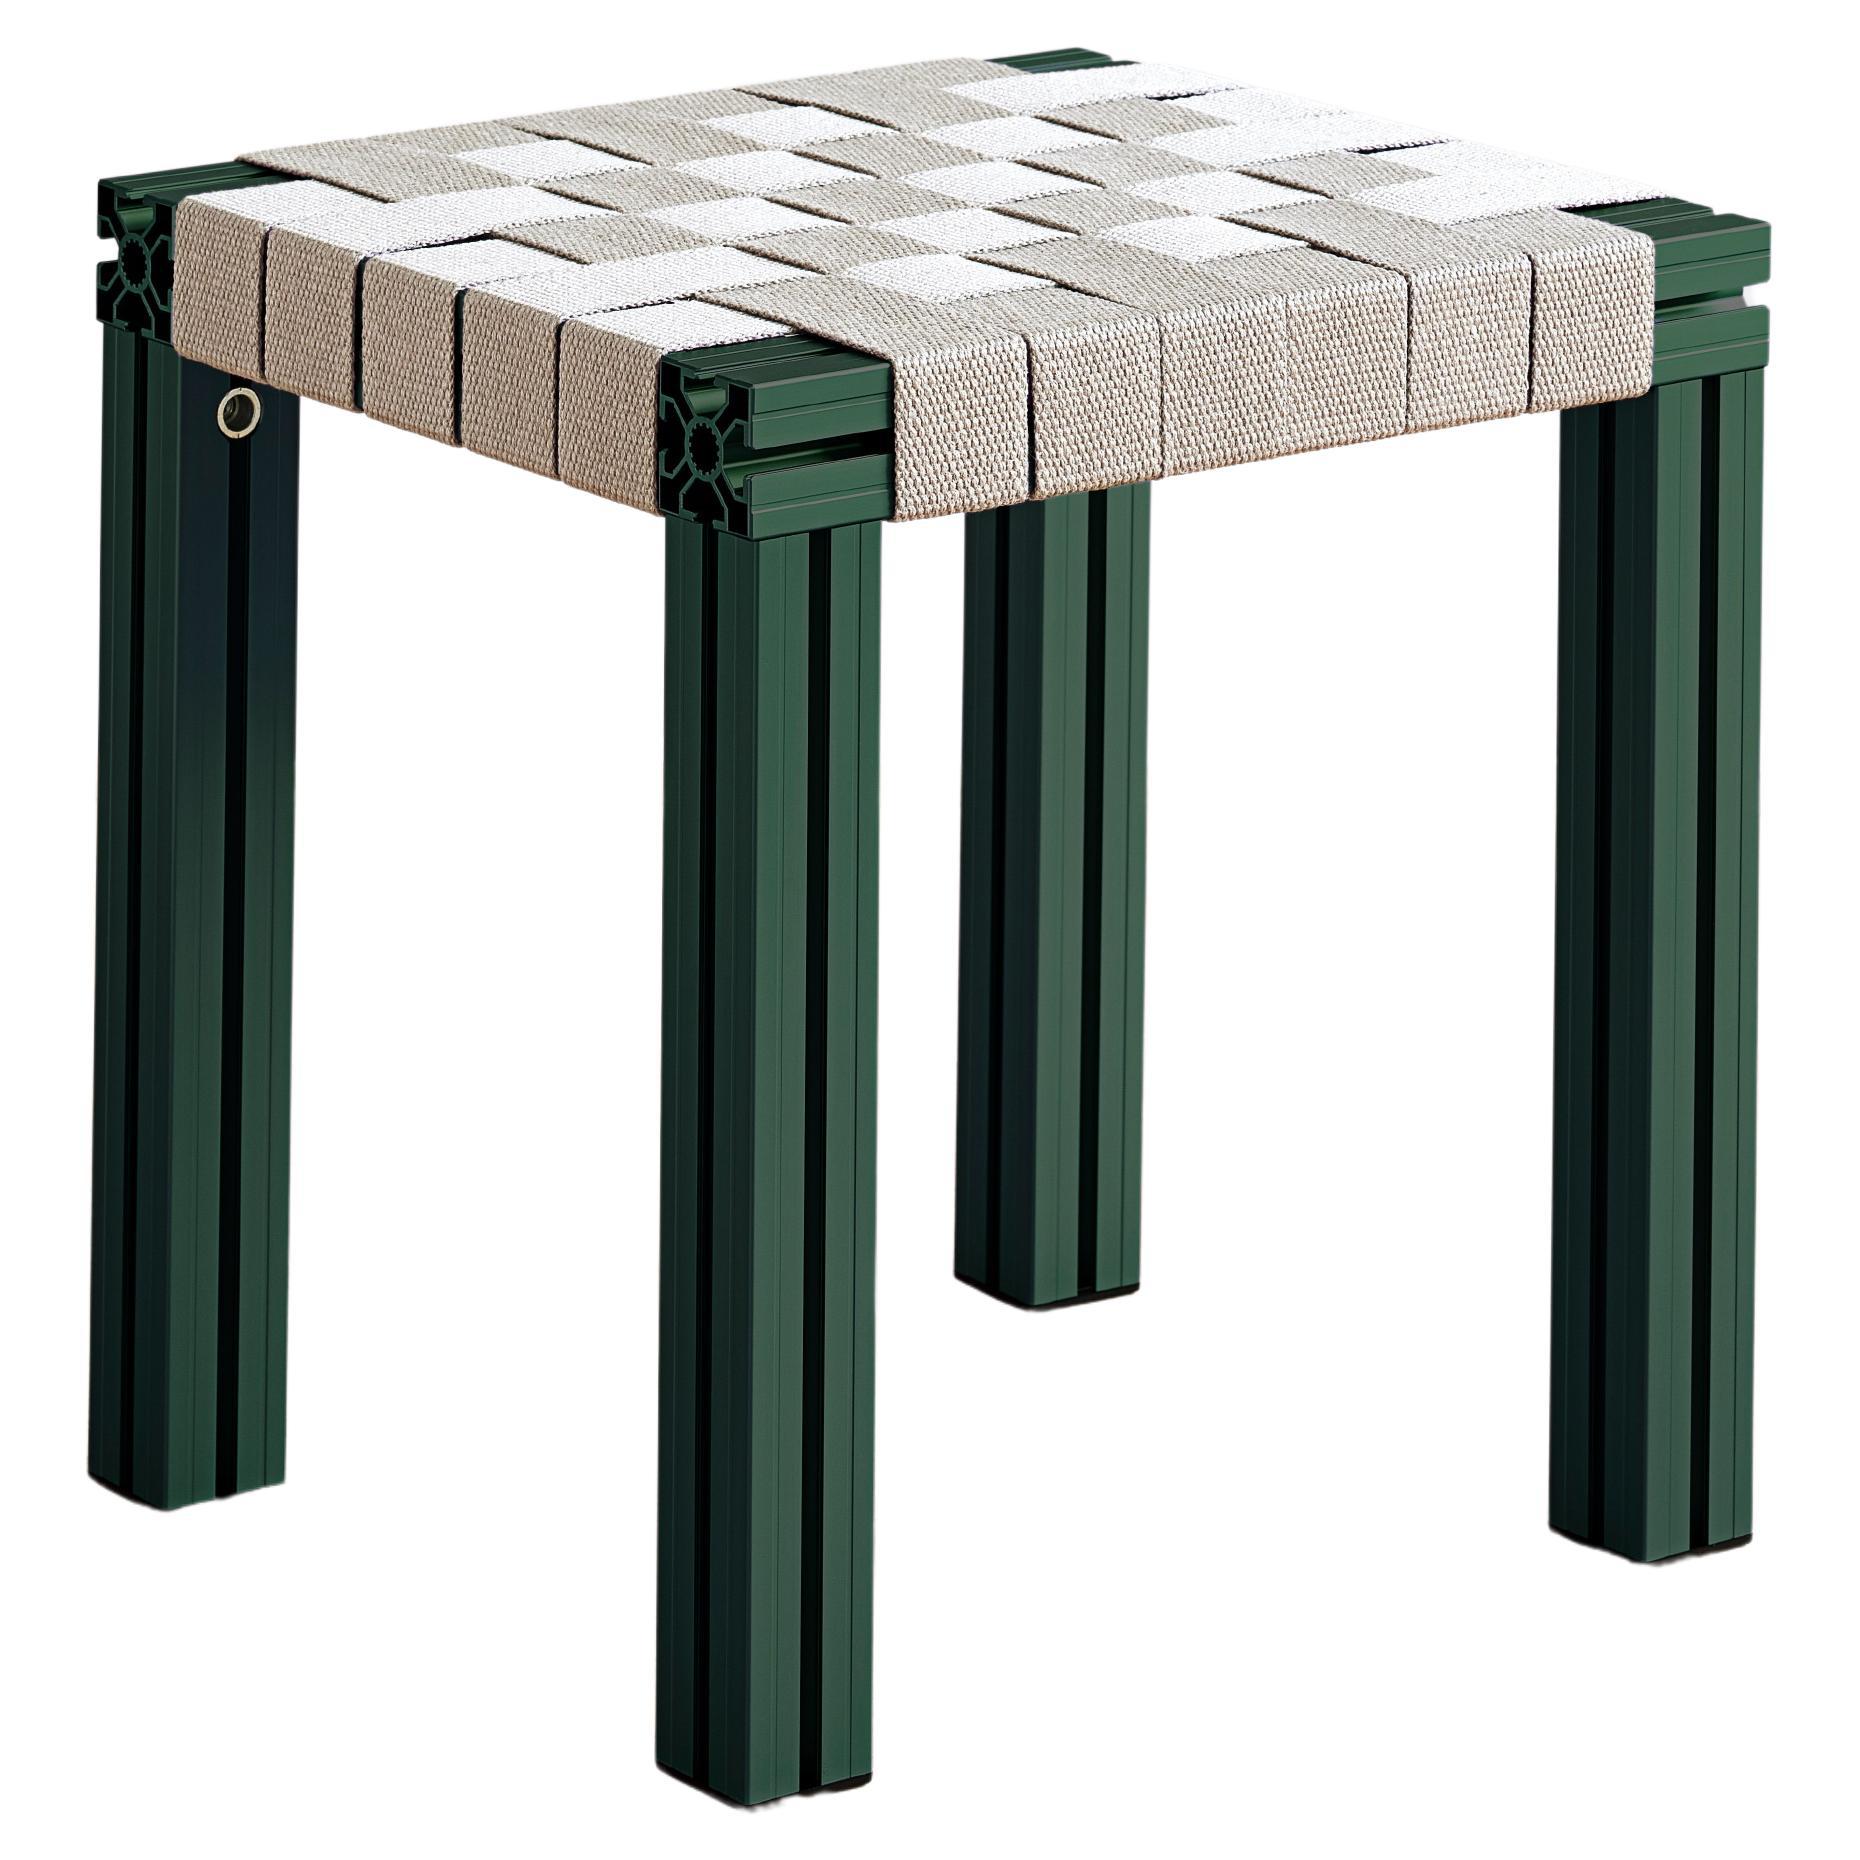 Green Aluminium Stool with Flax Webbing Seat from Anodised Wicker Collection For Sale